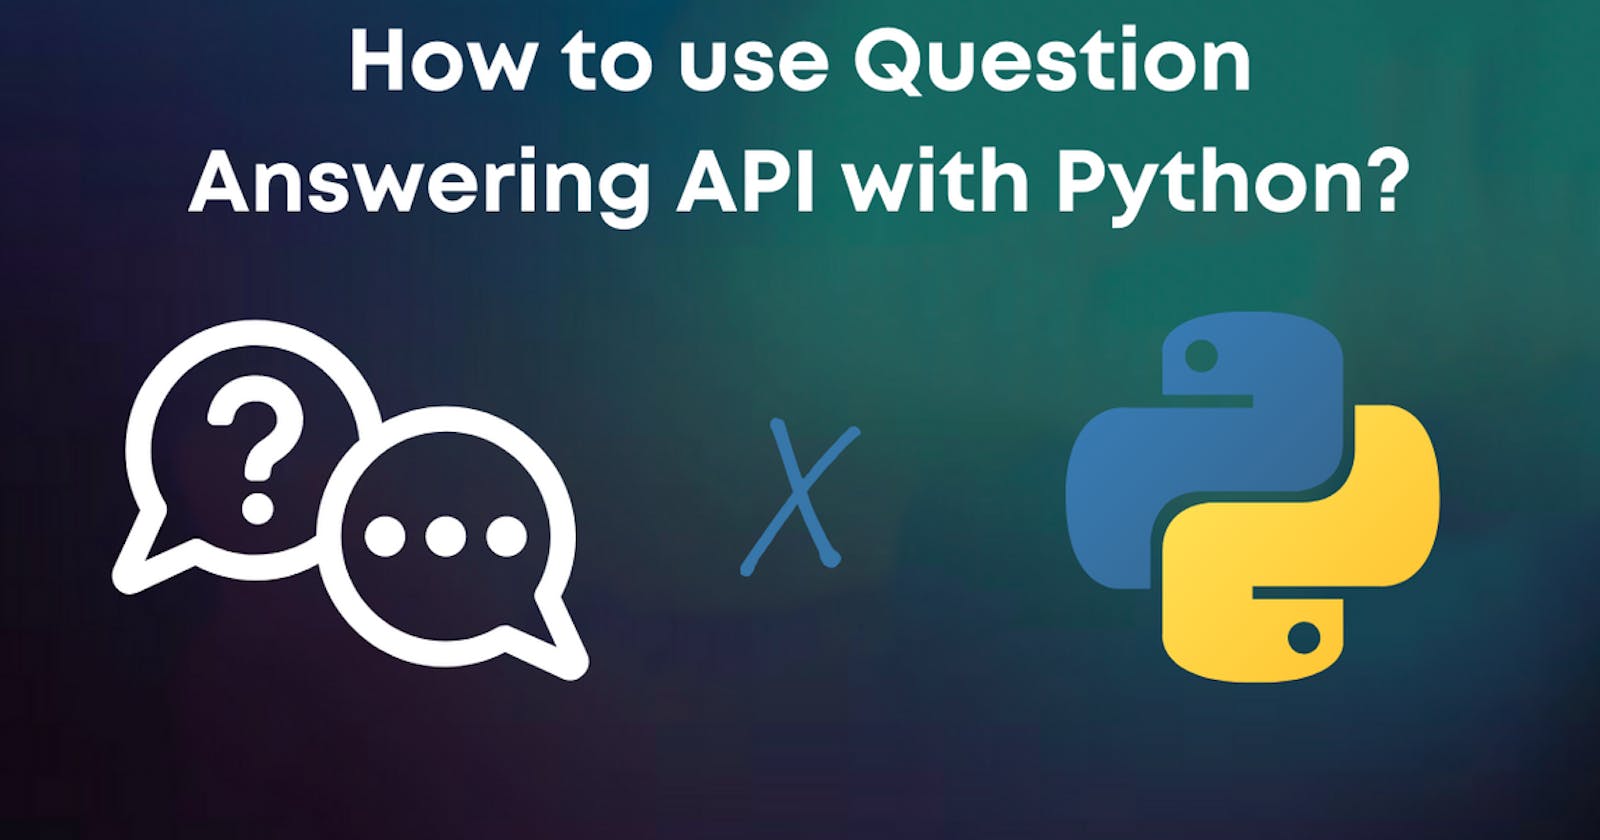 How to use Question Answering API for Text with Python in 5 minutes?